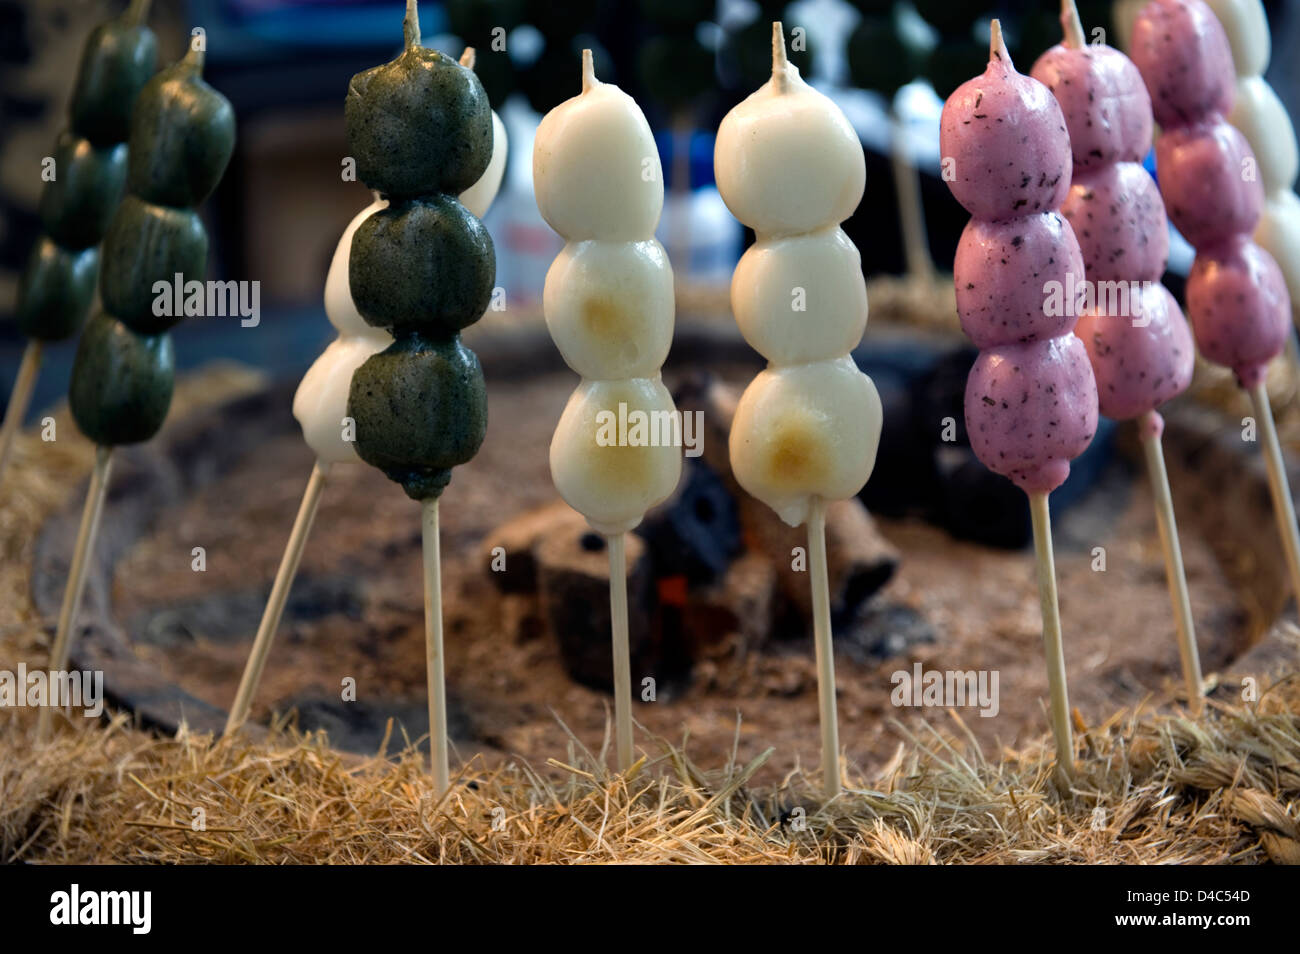 Green, white and pink 'dango' (three mochi rice cake balls on a skewer), Japanese treats being warmed over glowing hot coals. Stock Photo